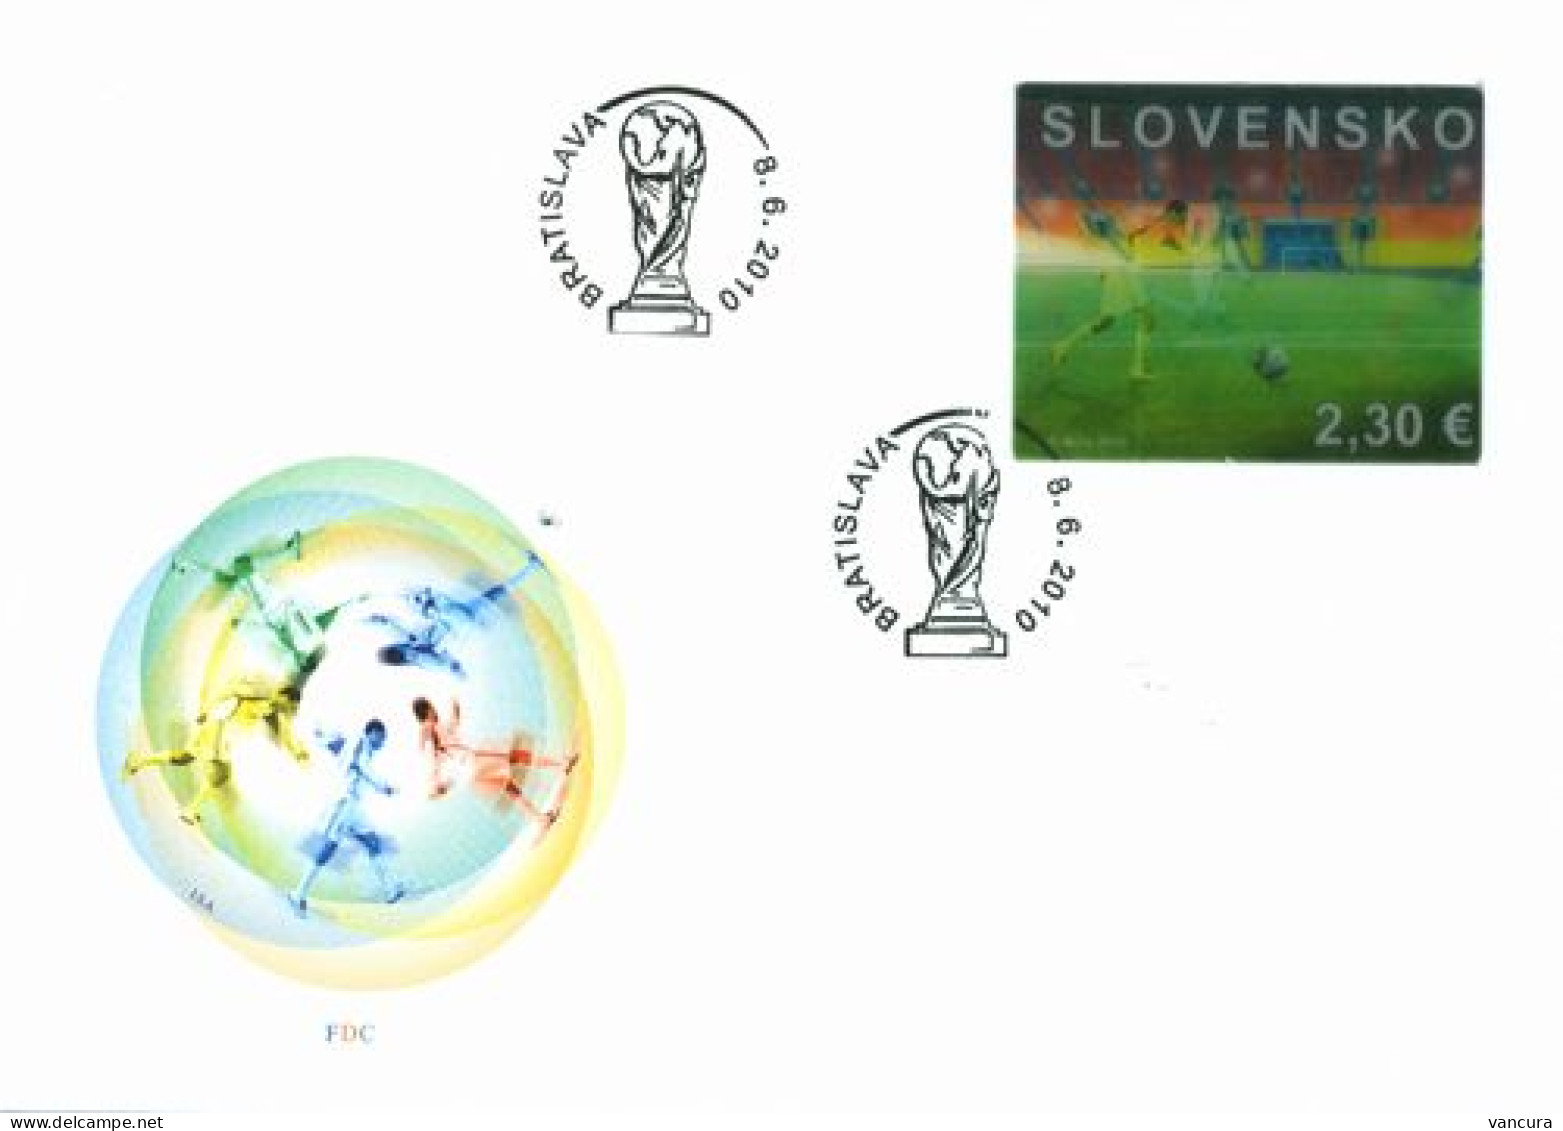 FDC 475 Slovakia In Football World Cup Final In South Africa 2010 - FDC